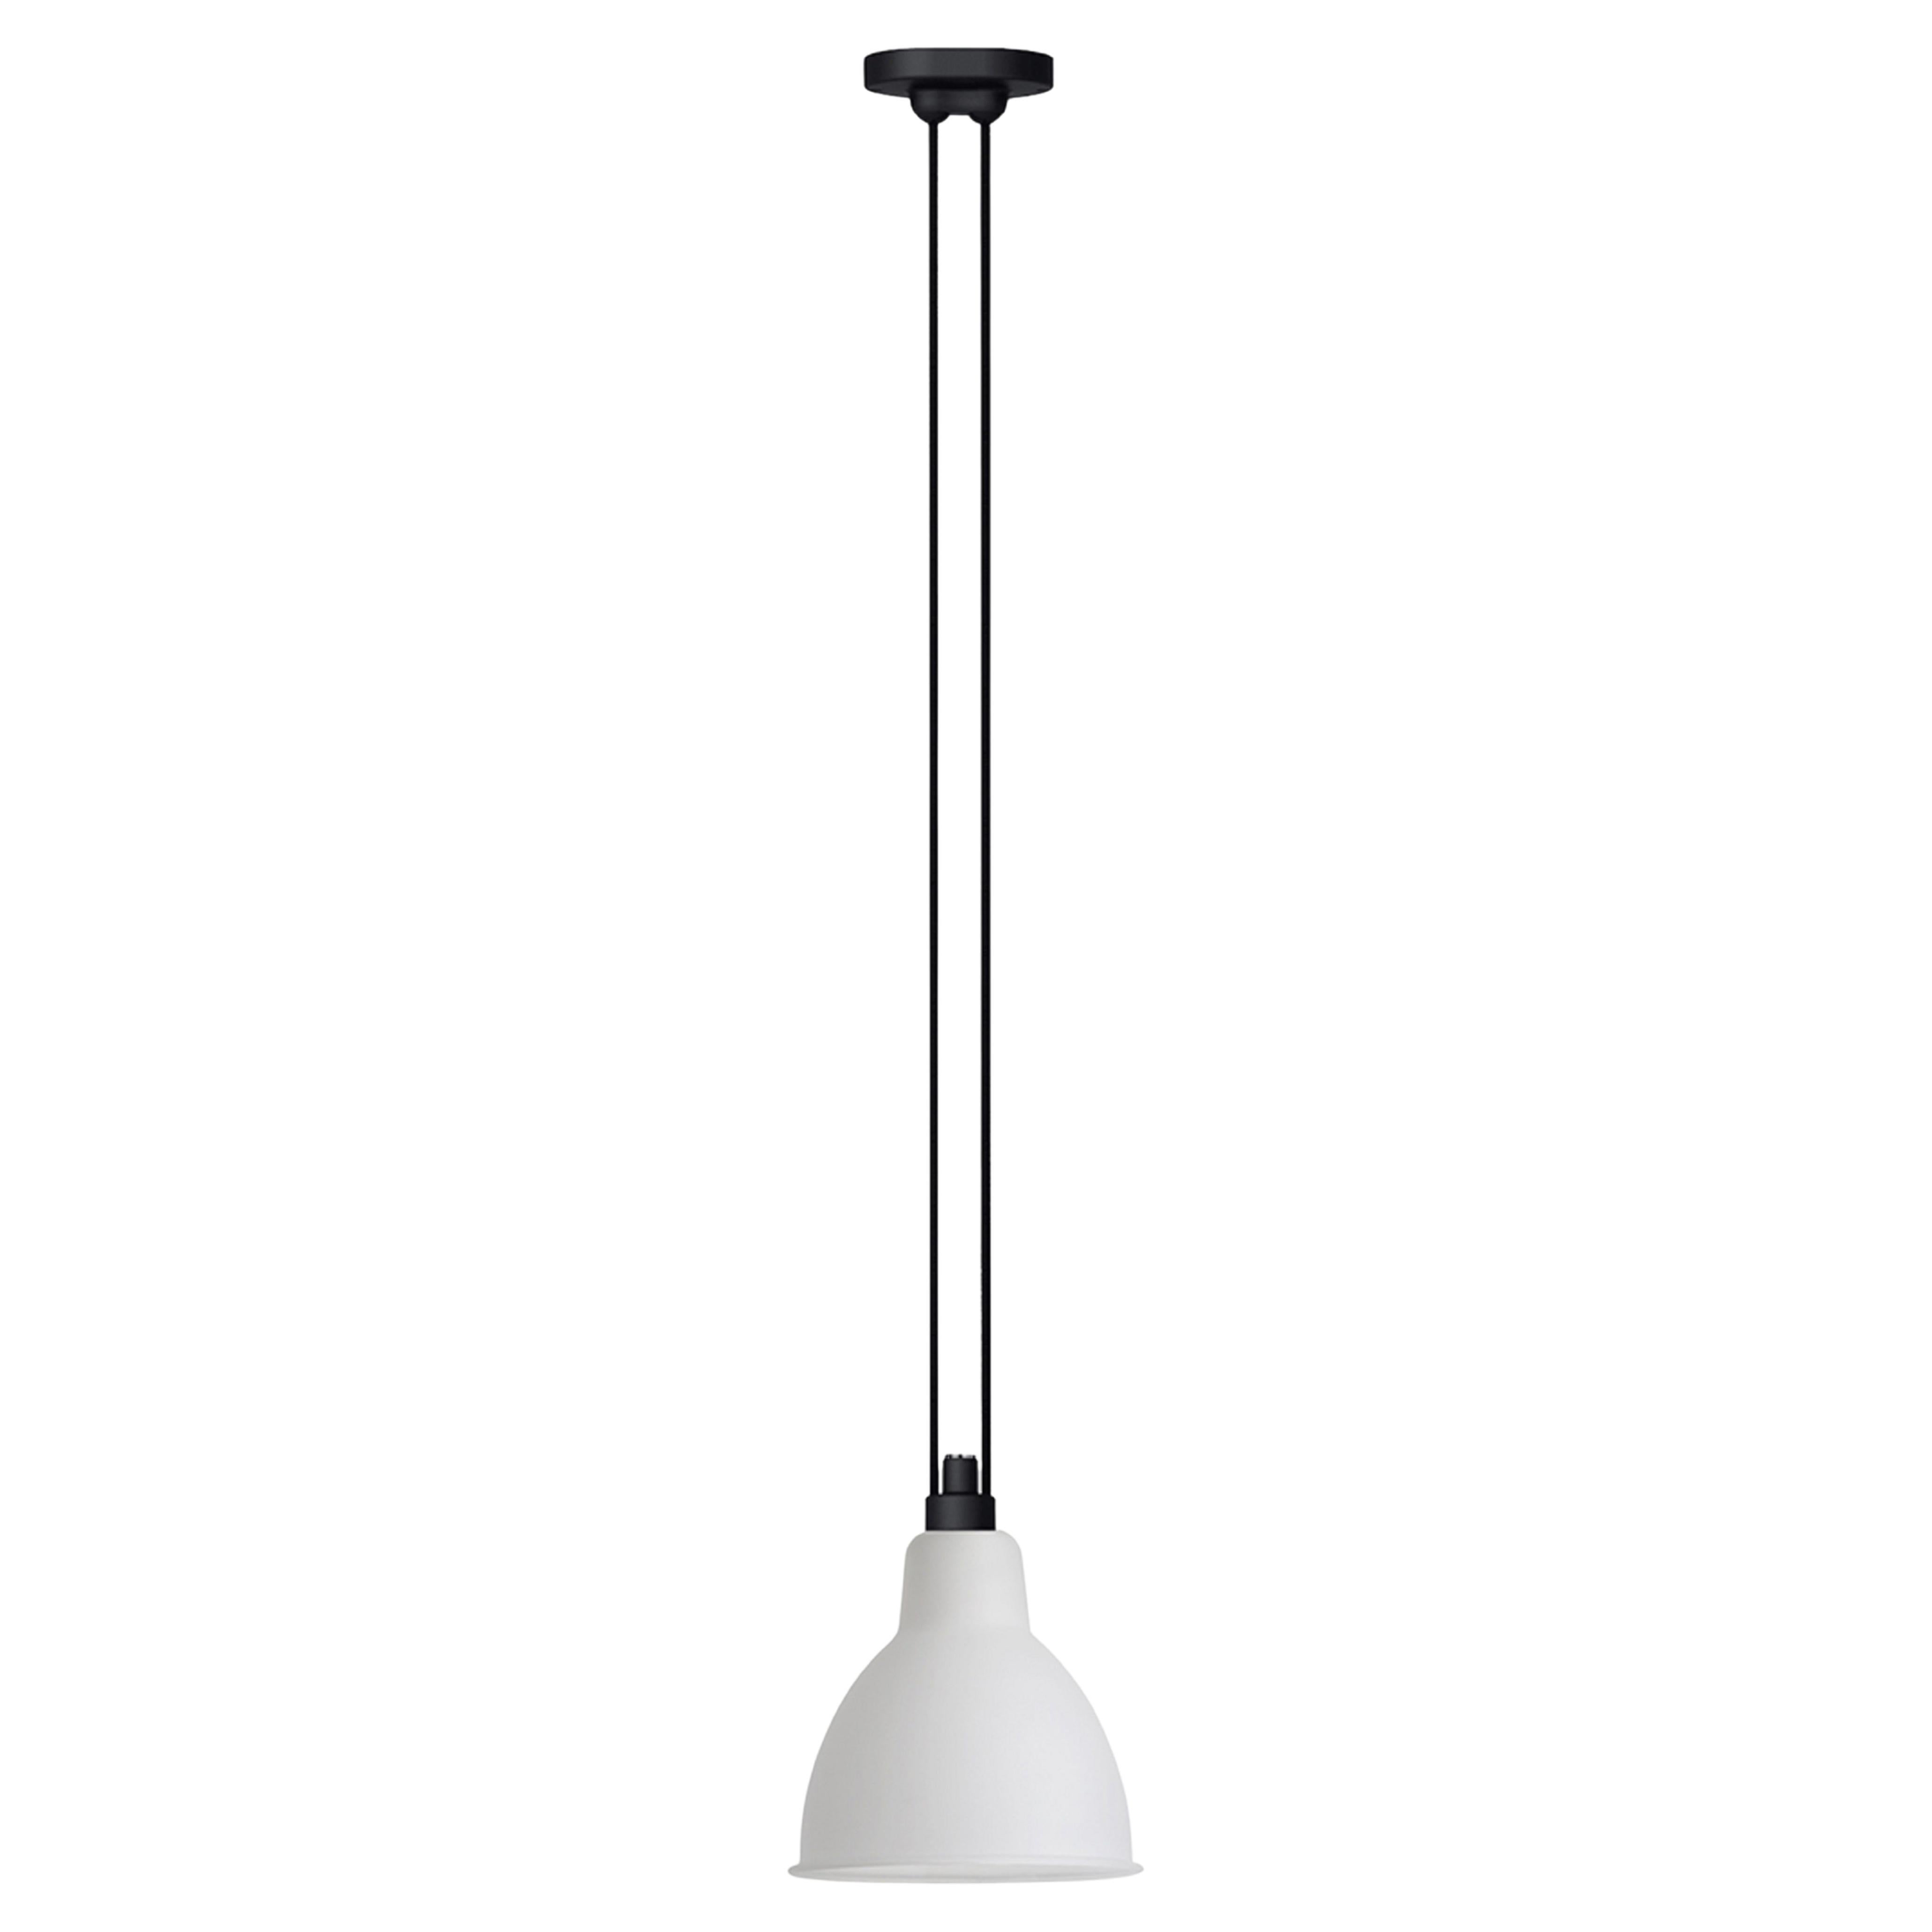 DCW Editions Les Acrobates Nº322 Large Round Pendant Lamp in Frosted Glass Shade For Sale